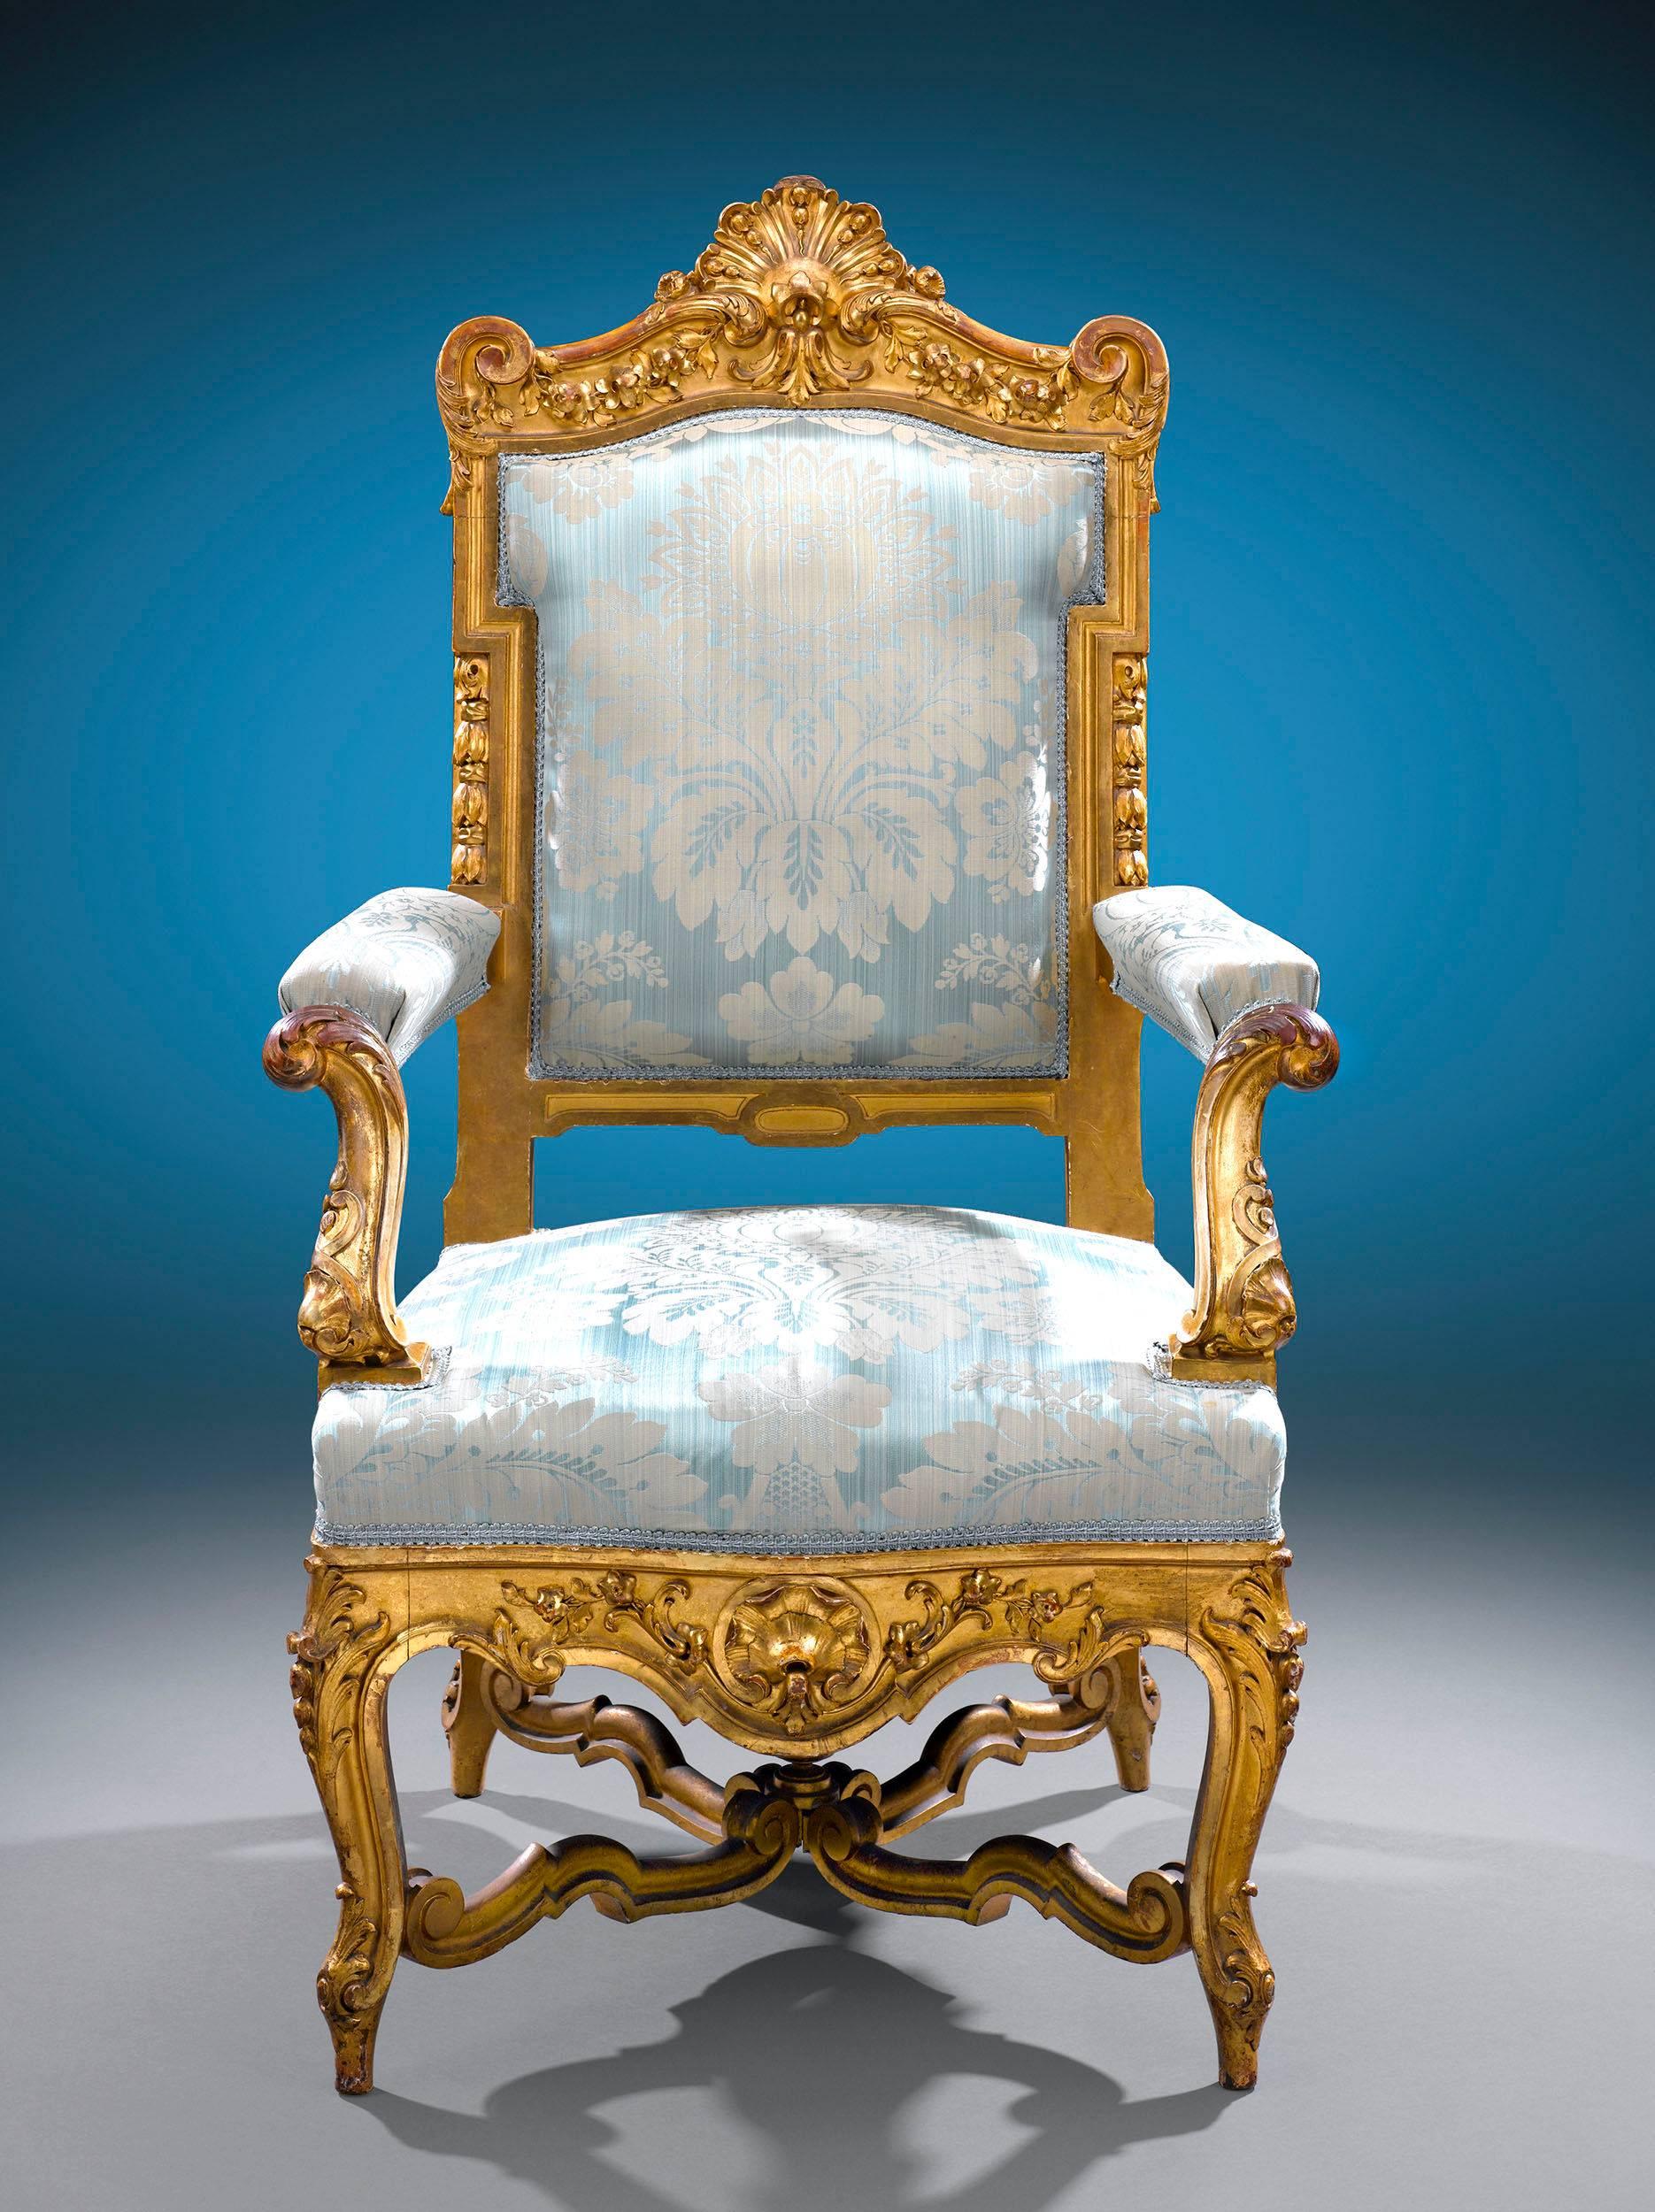 This regal pair of giltwood armchairs exhibits the best of 18th century French design. These stately fauteuils feature grand Louis XIV and Louis XV ornamentation, from the central shell cresting and floral garlands on the high, indented backs to the